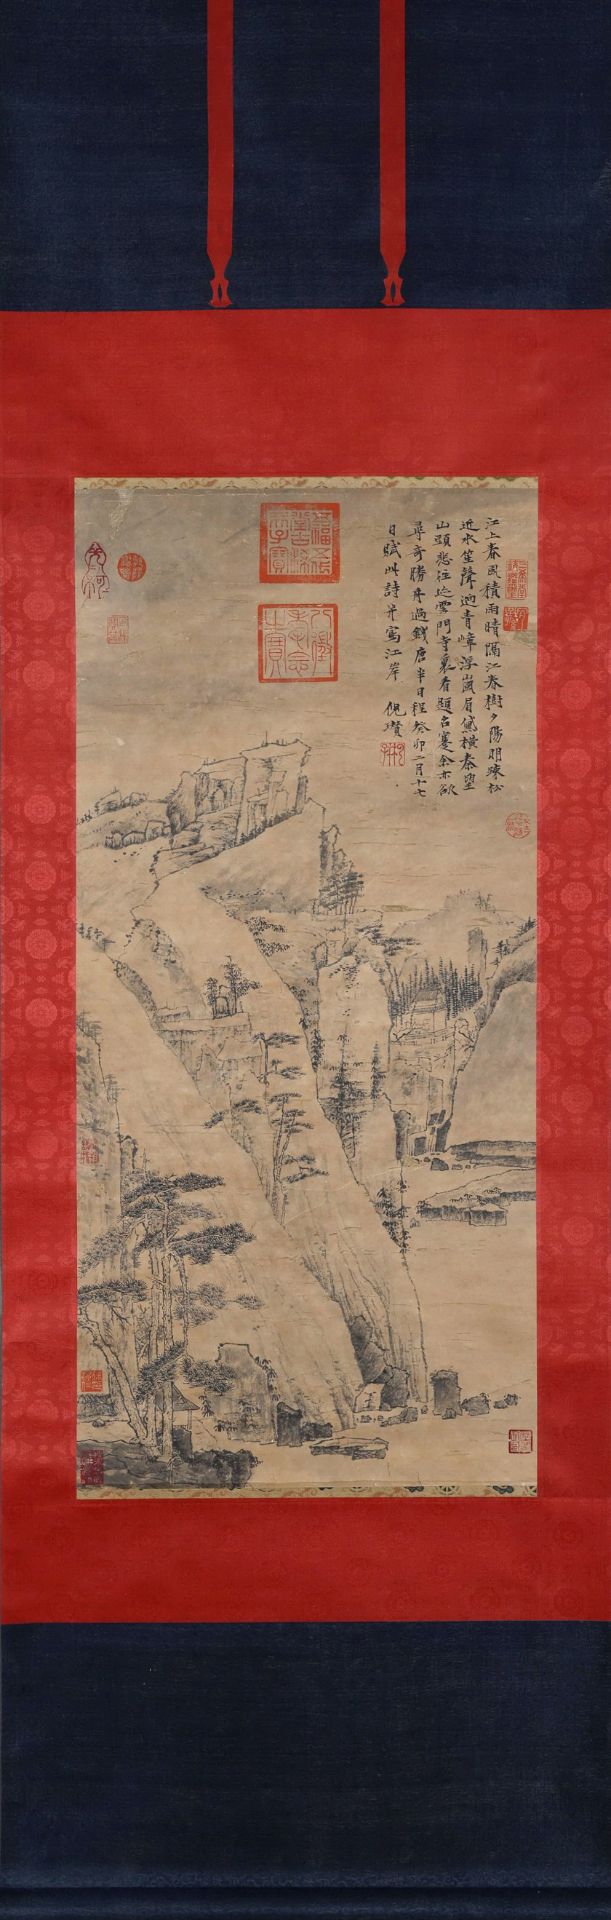 A Chinese Scroll Painting By Ni Zan - Image 10 of 10